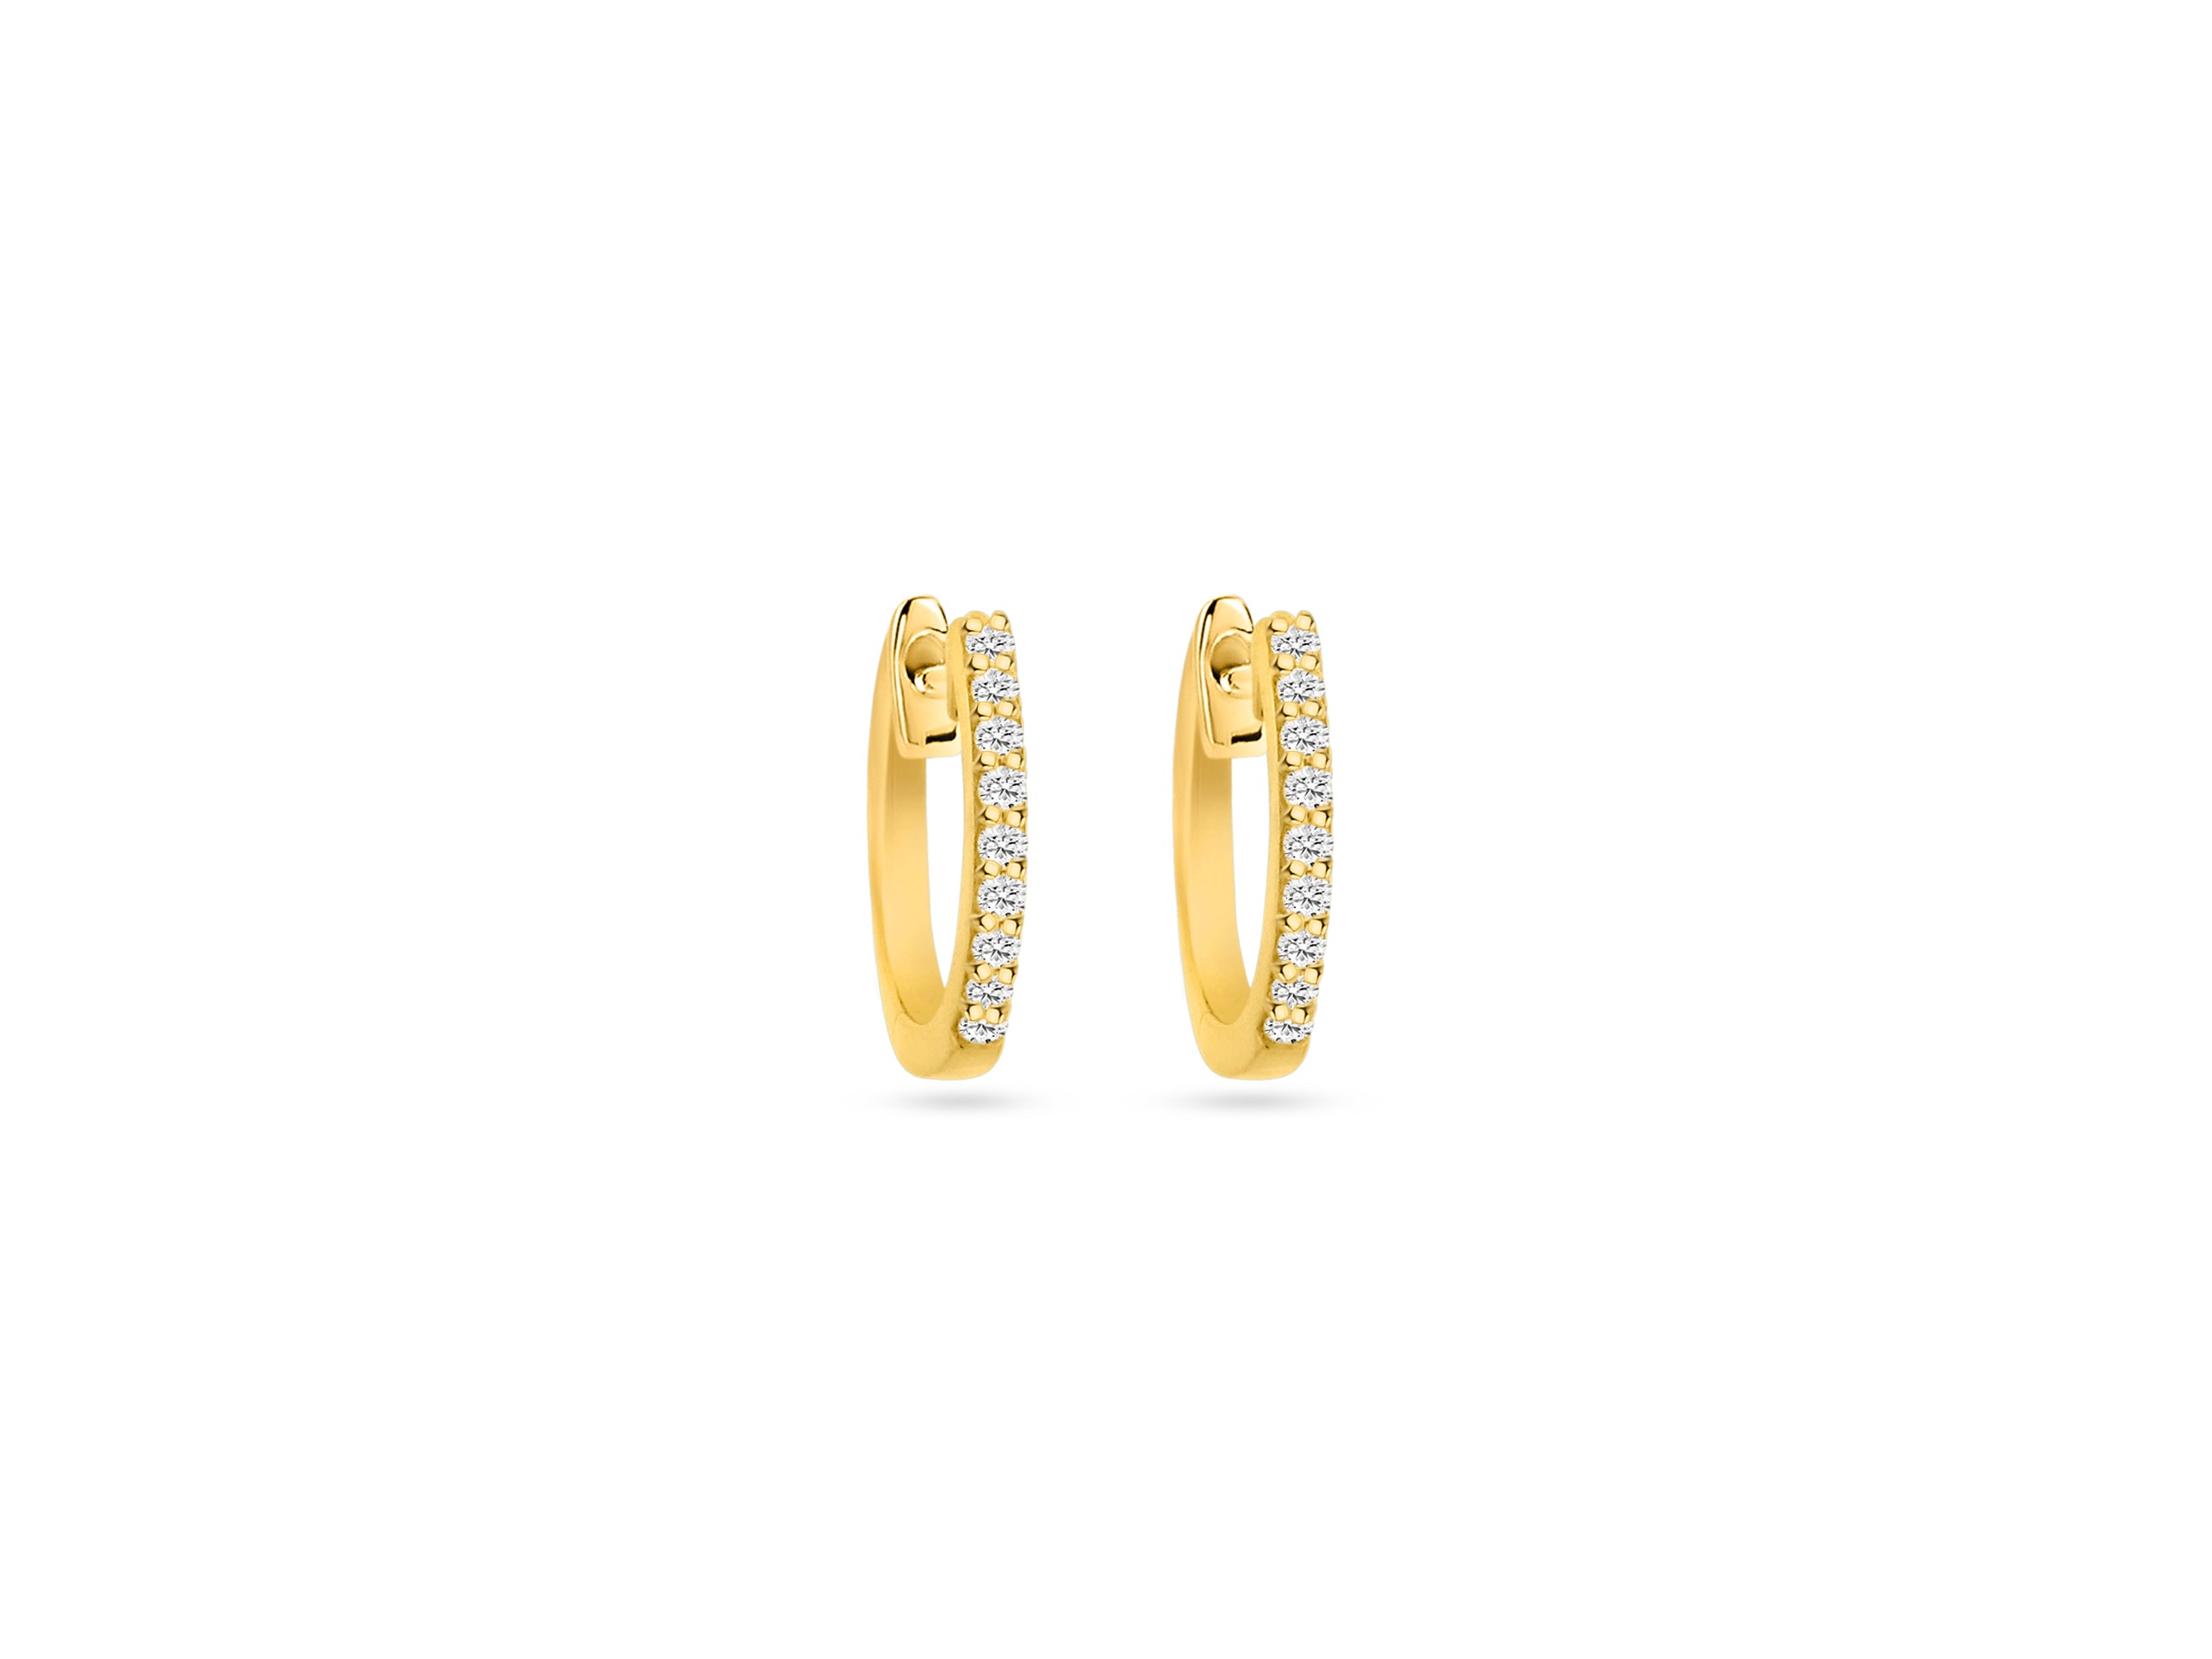 MULLOYS PRIVE18K YELLOW GOLD .18CT VS SI CLARITY G COLOR DIAMOND HOOPS